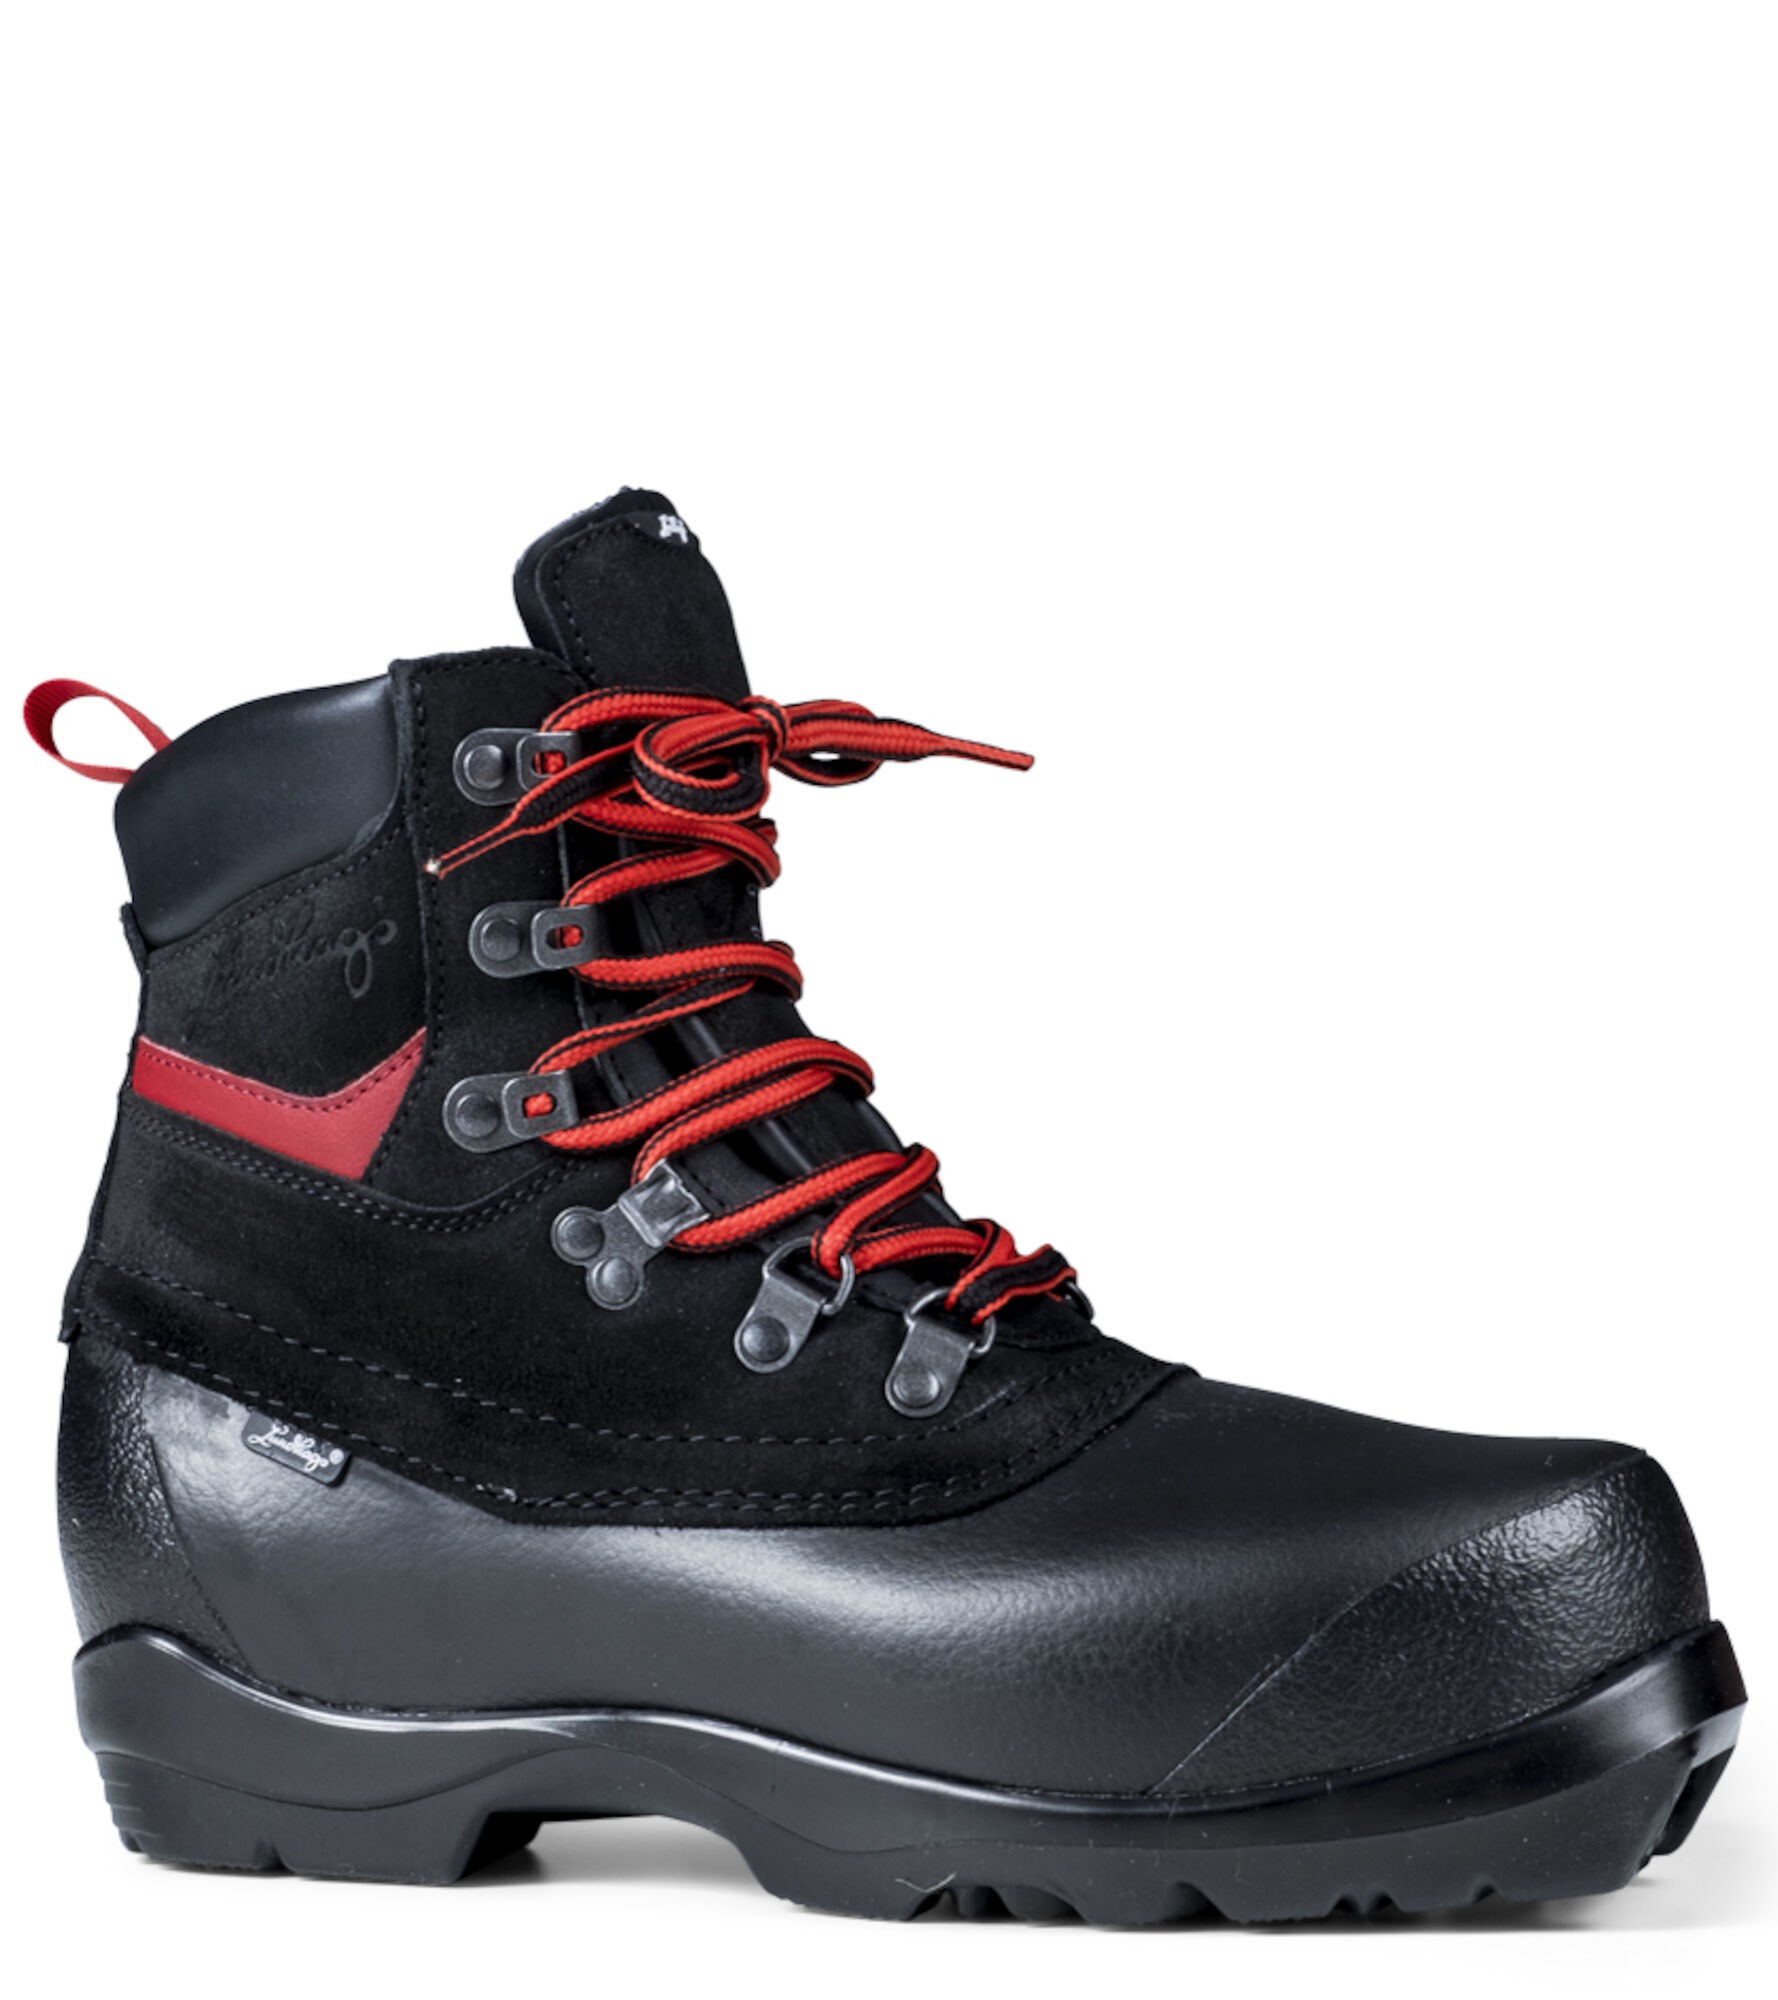 Guide BC Ski and Skate Boots Unisex